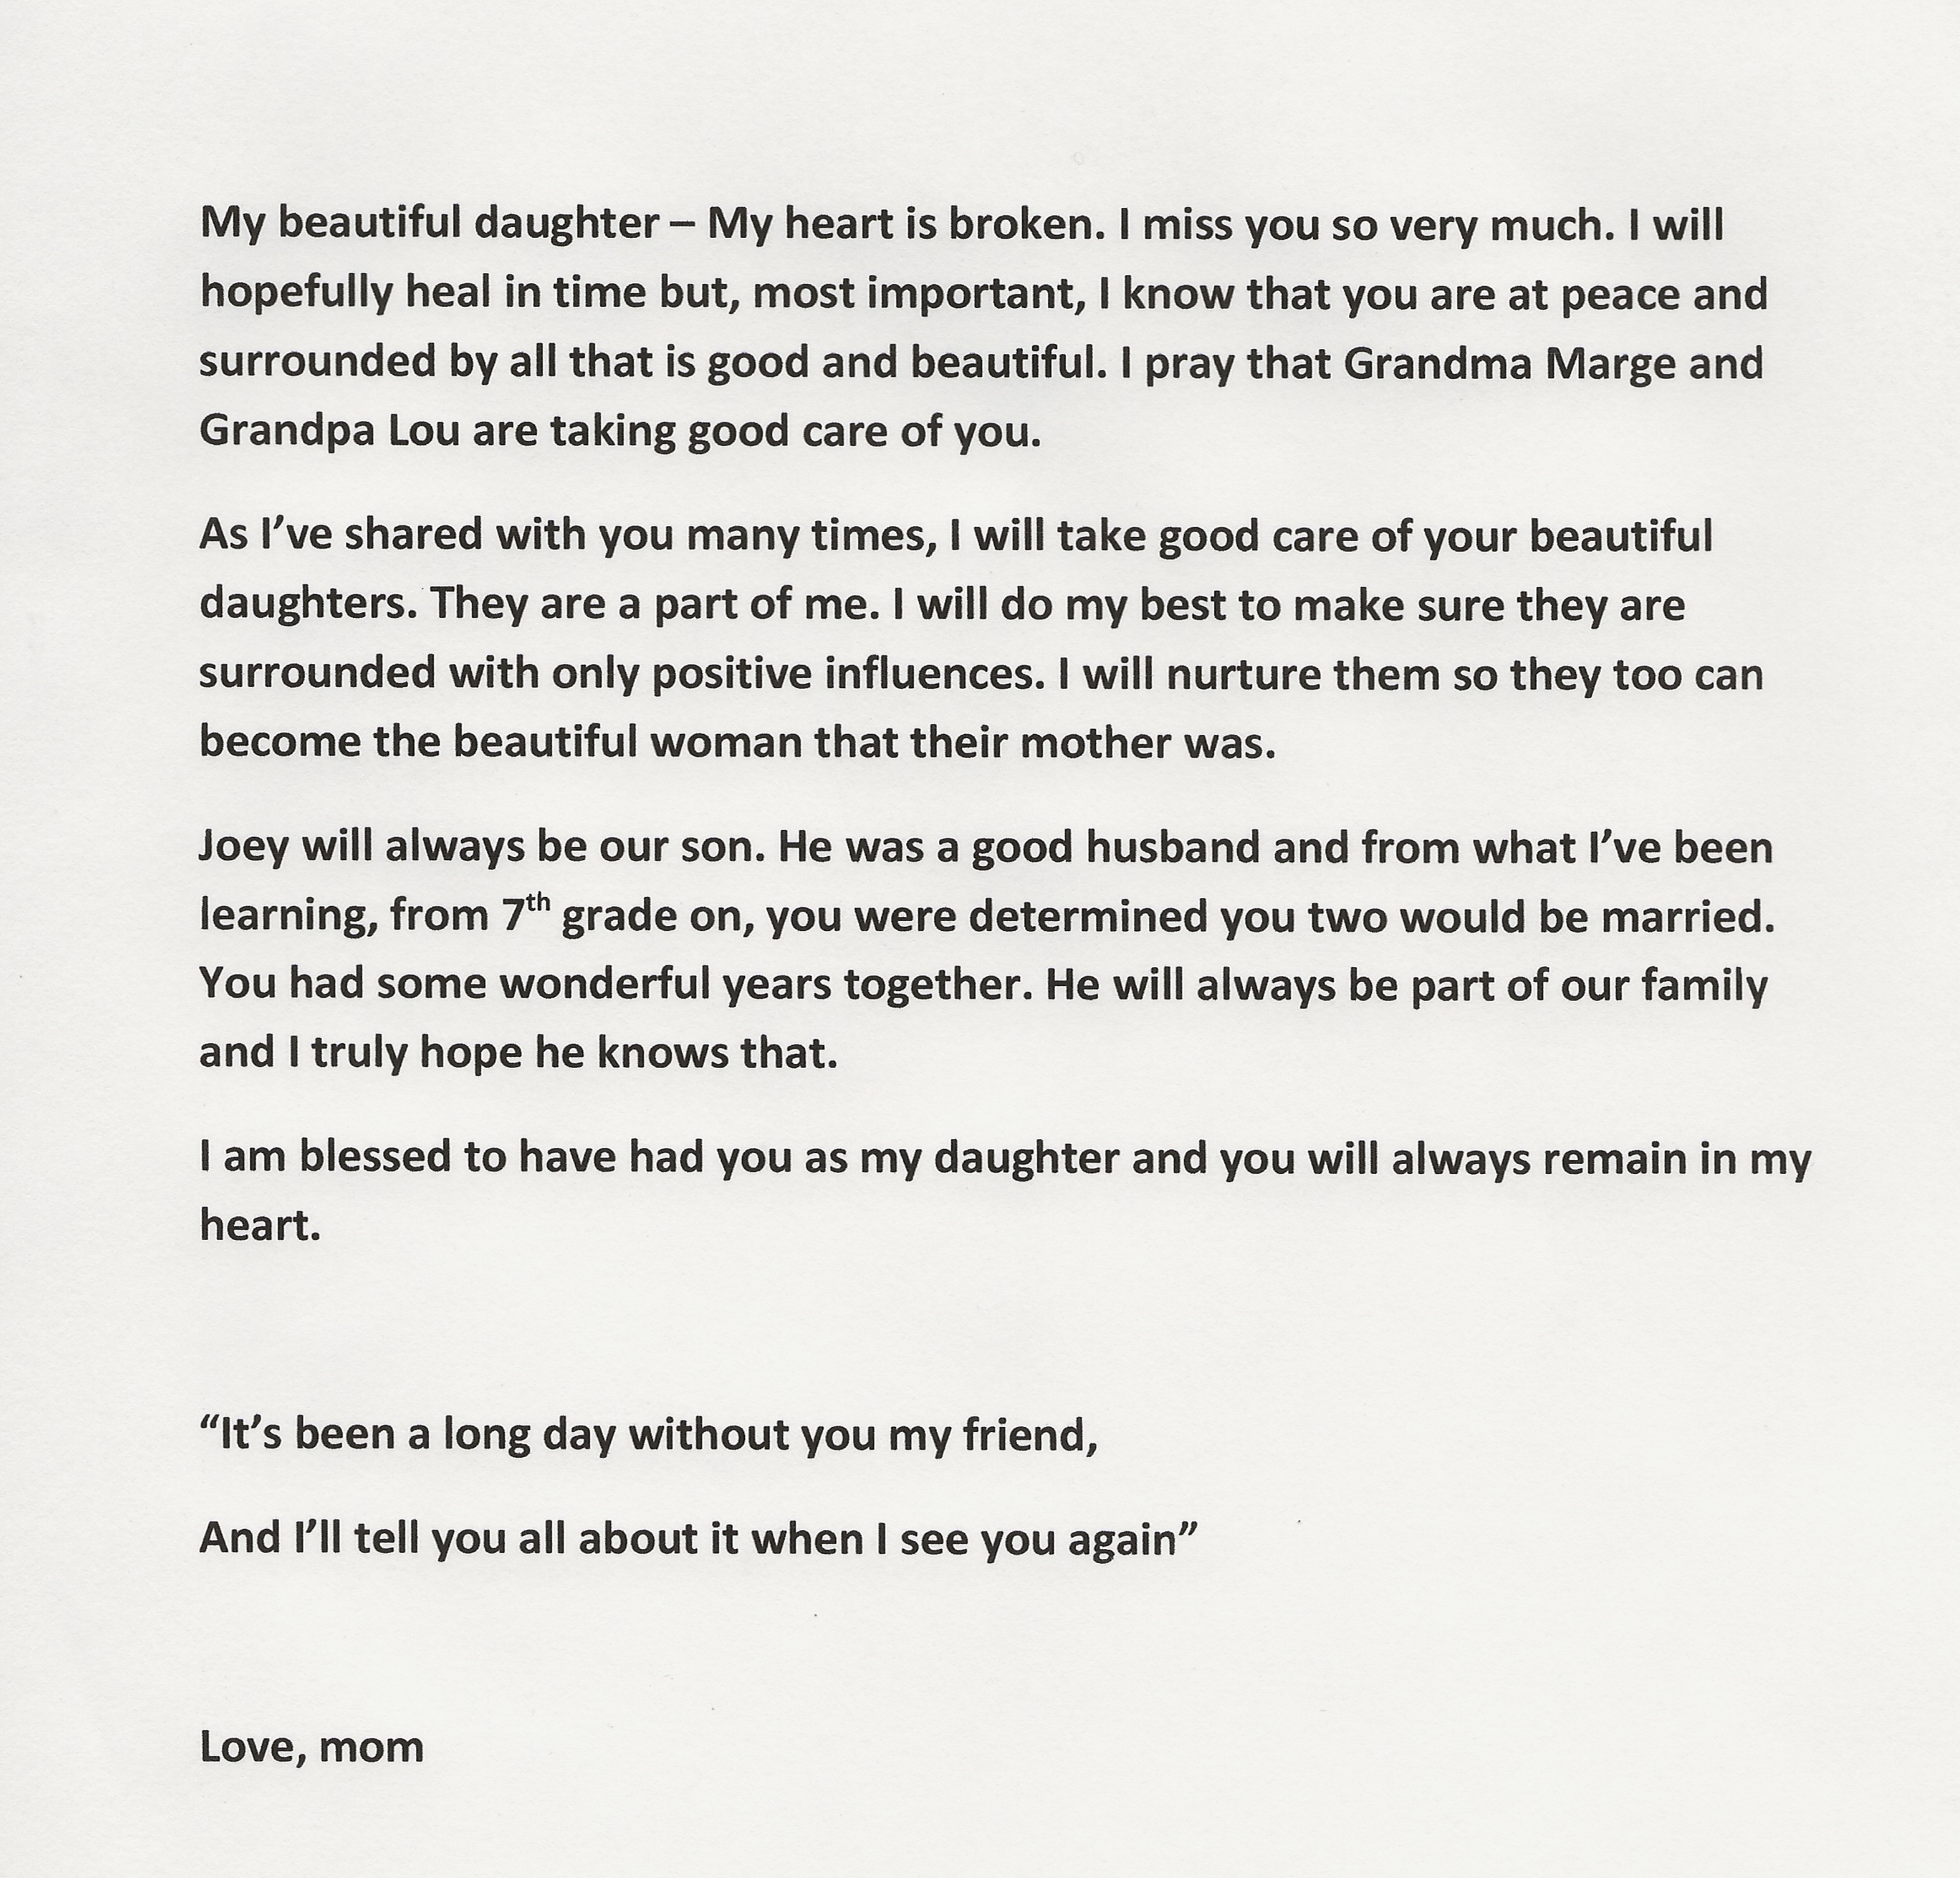 October 4, 2019 Letter to Emily From Mom.